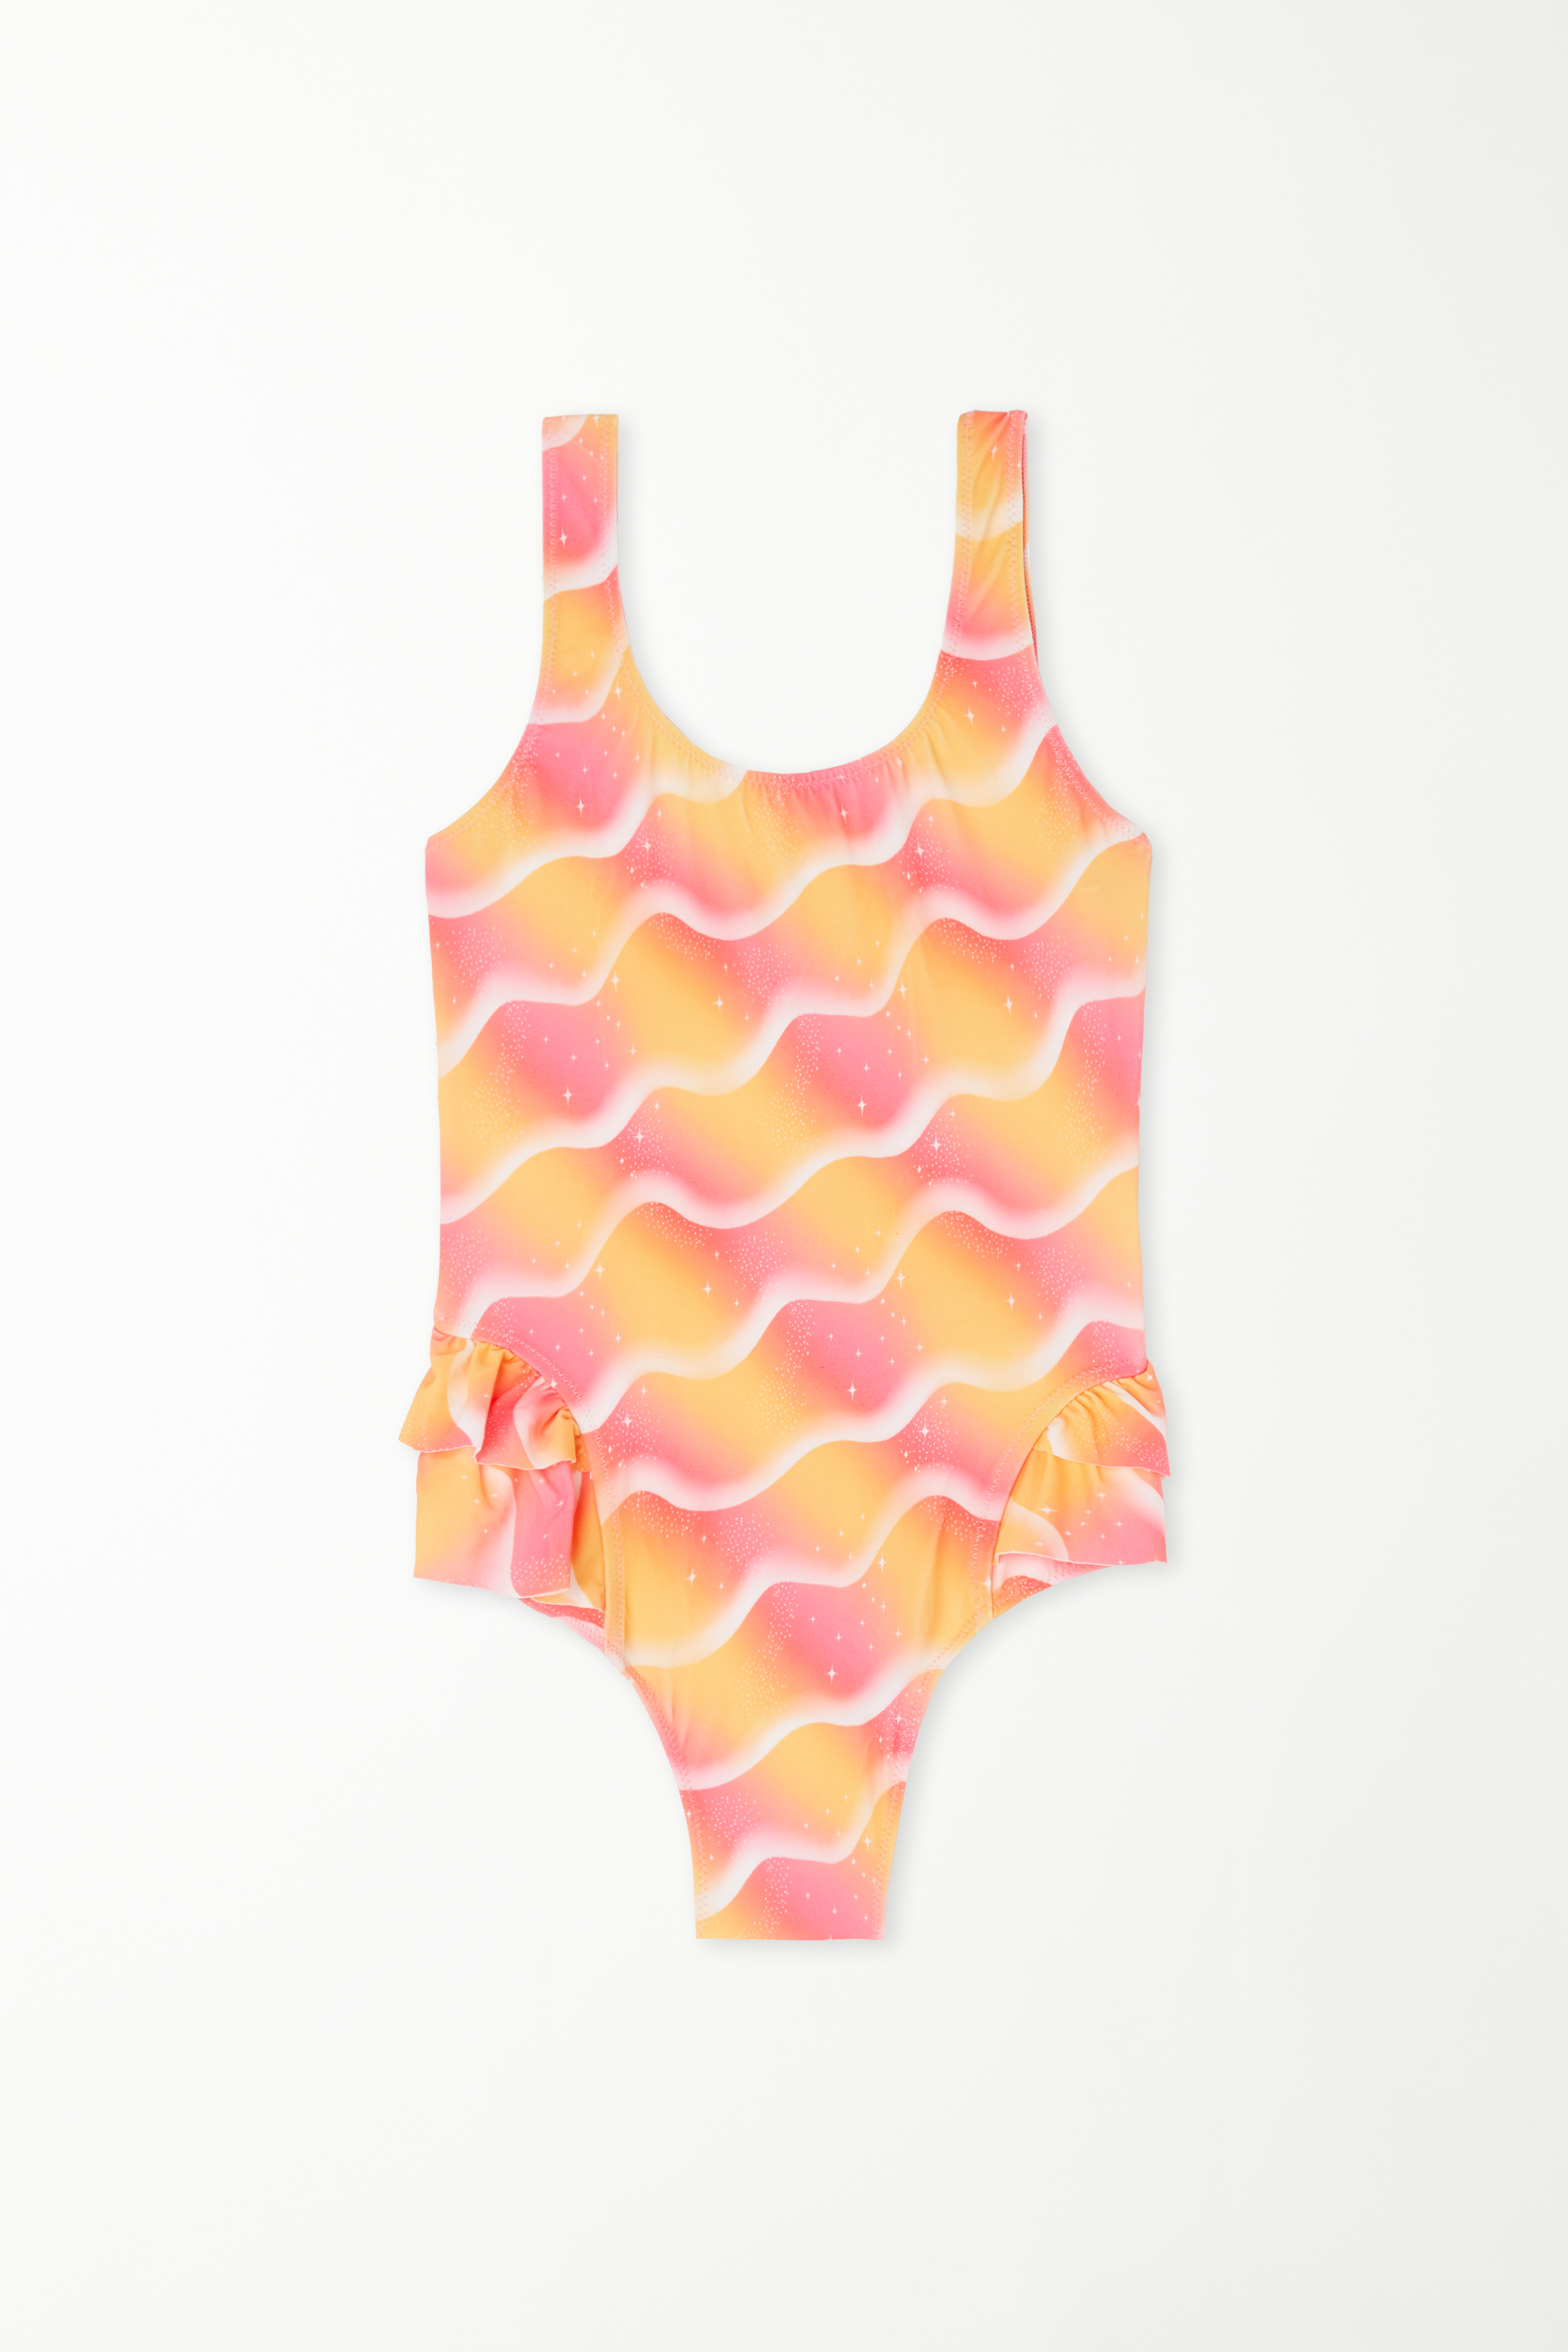 Girls’ Mermaid Print One-Piece Bathing Suit with Frills